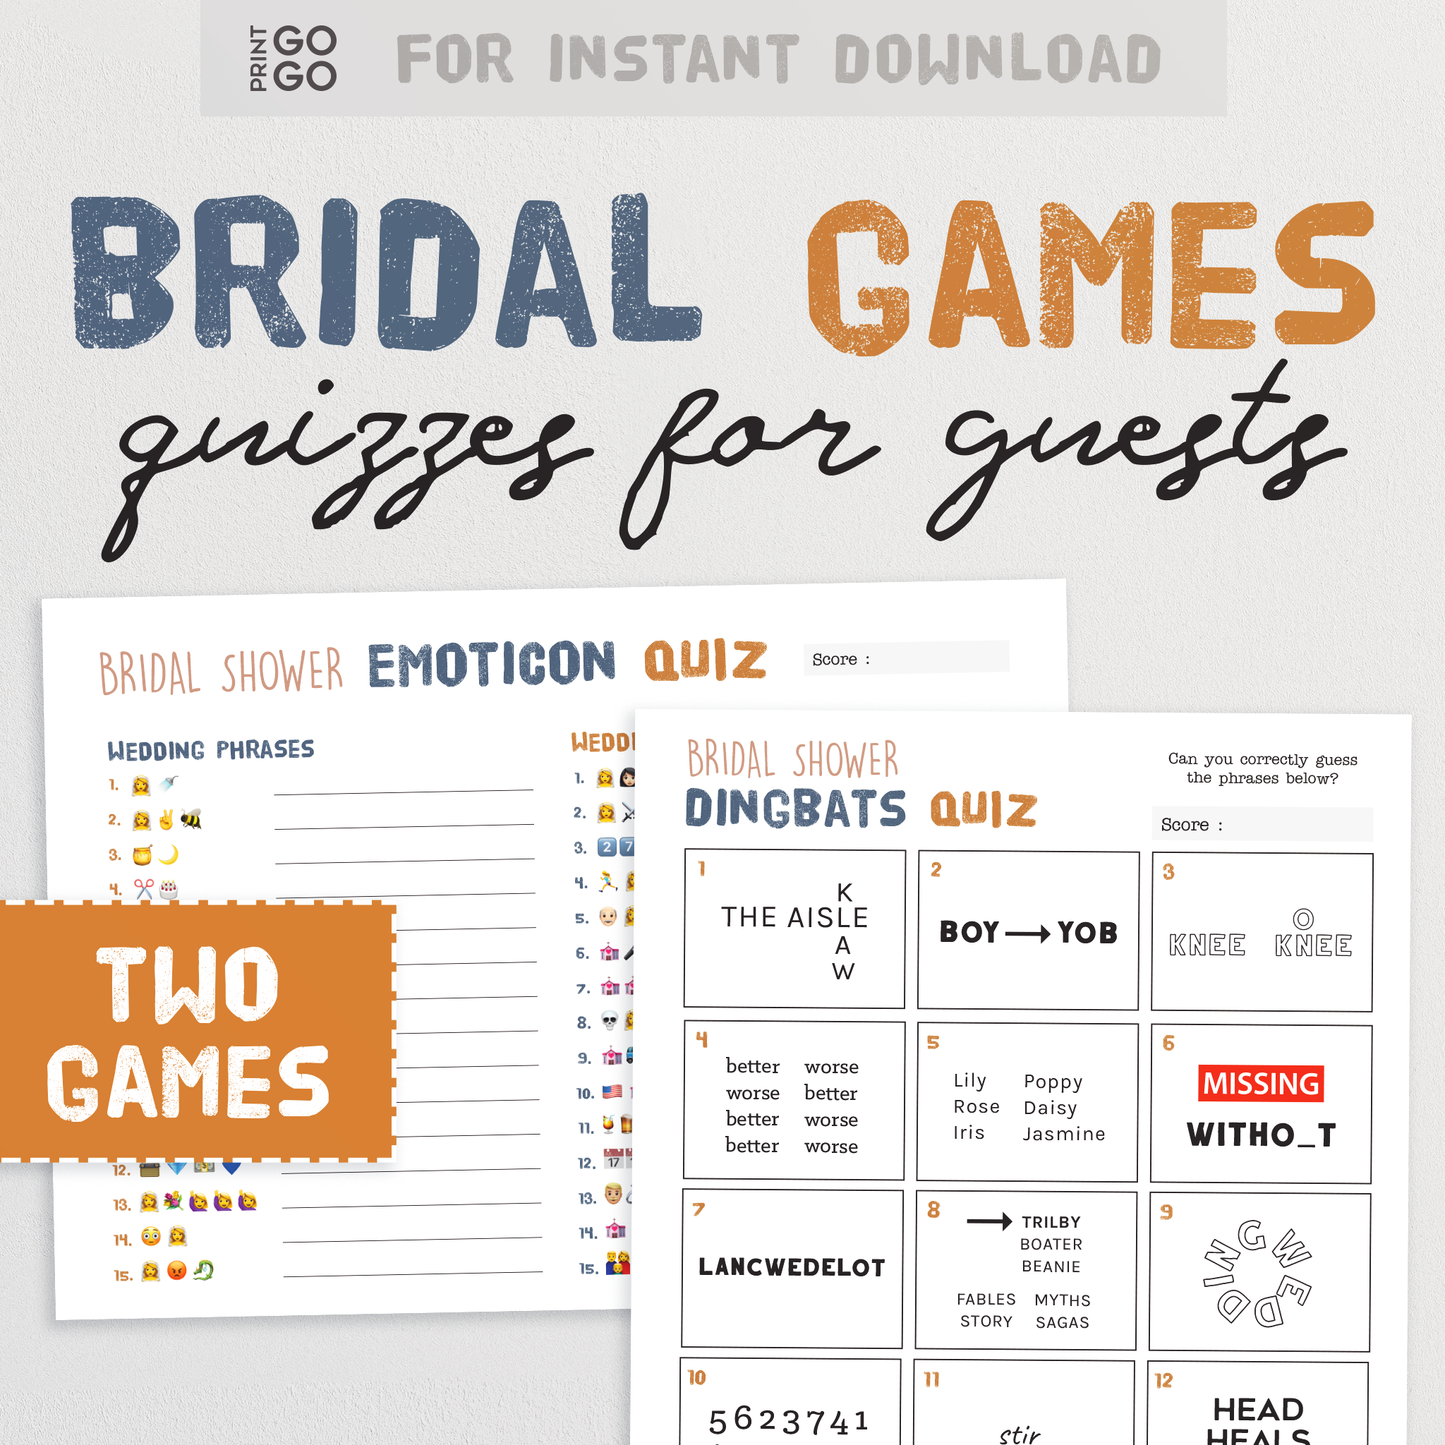 Bridal Shower Quiz Bundle - Fun Printable Brain Teaser Puzzles for Guests to Solve | Includes Film and Phrases Emoticon Quiz + Dingbats